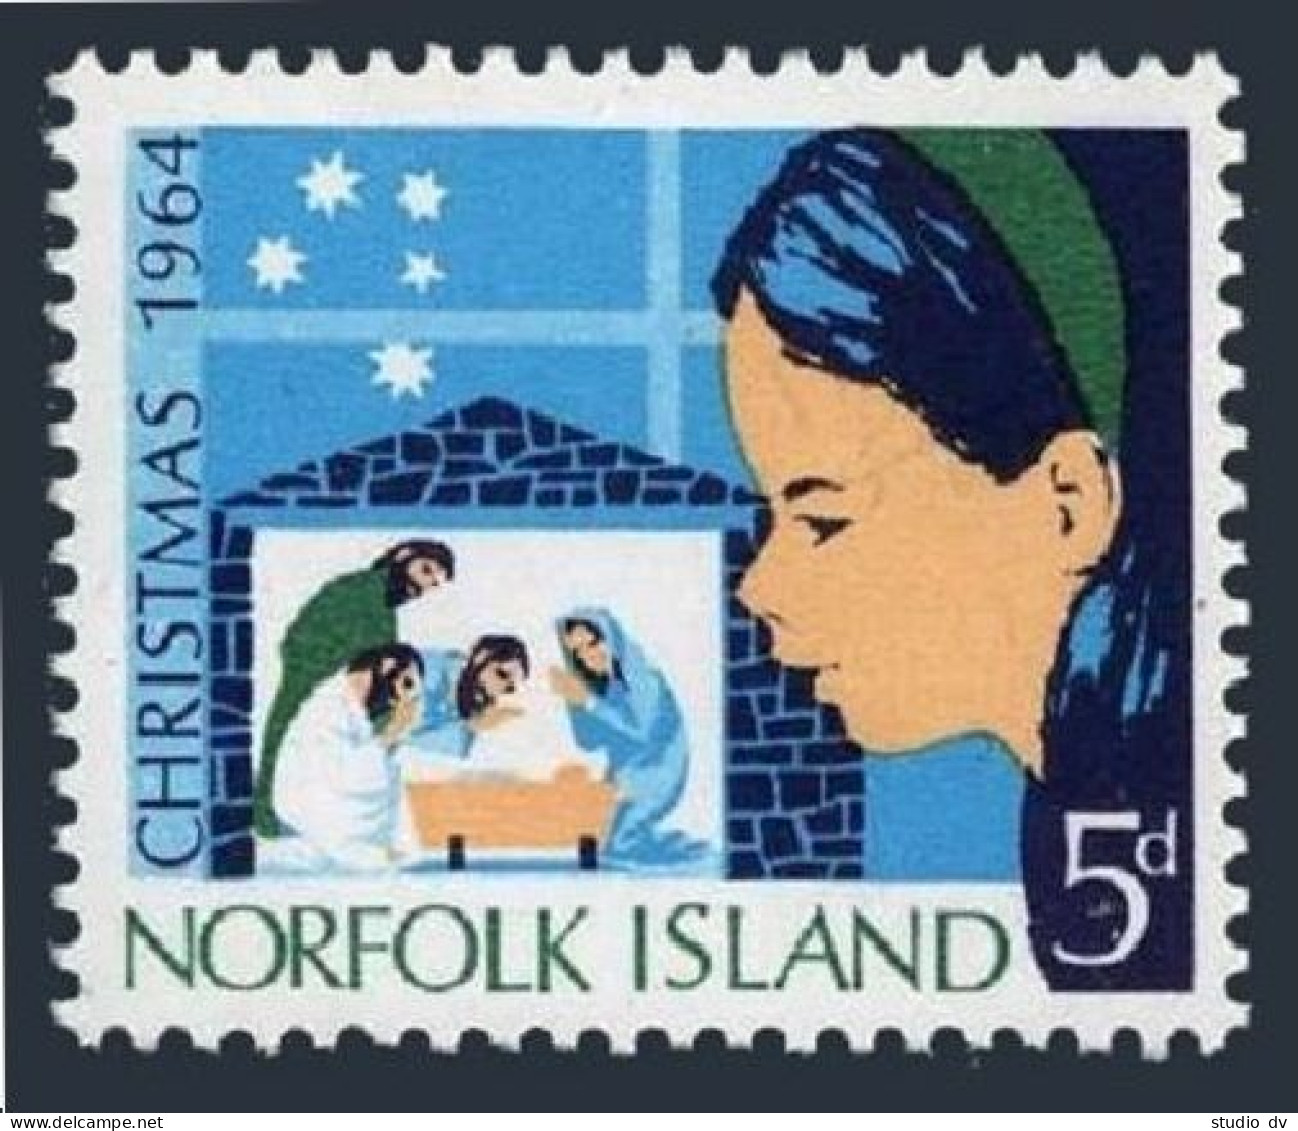 Norfolk 68 Two Stamps,MNH.Michel 59. Christmas 1964,Child. - Isola Norfolk